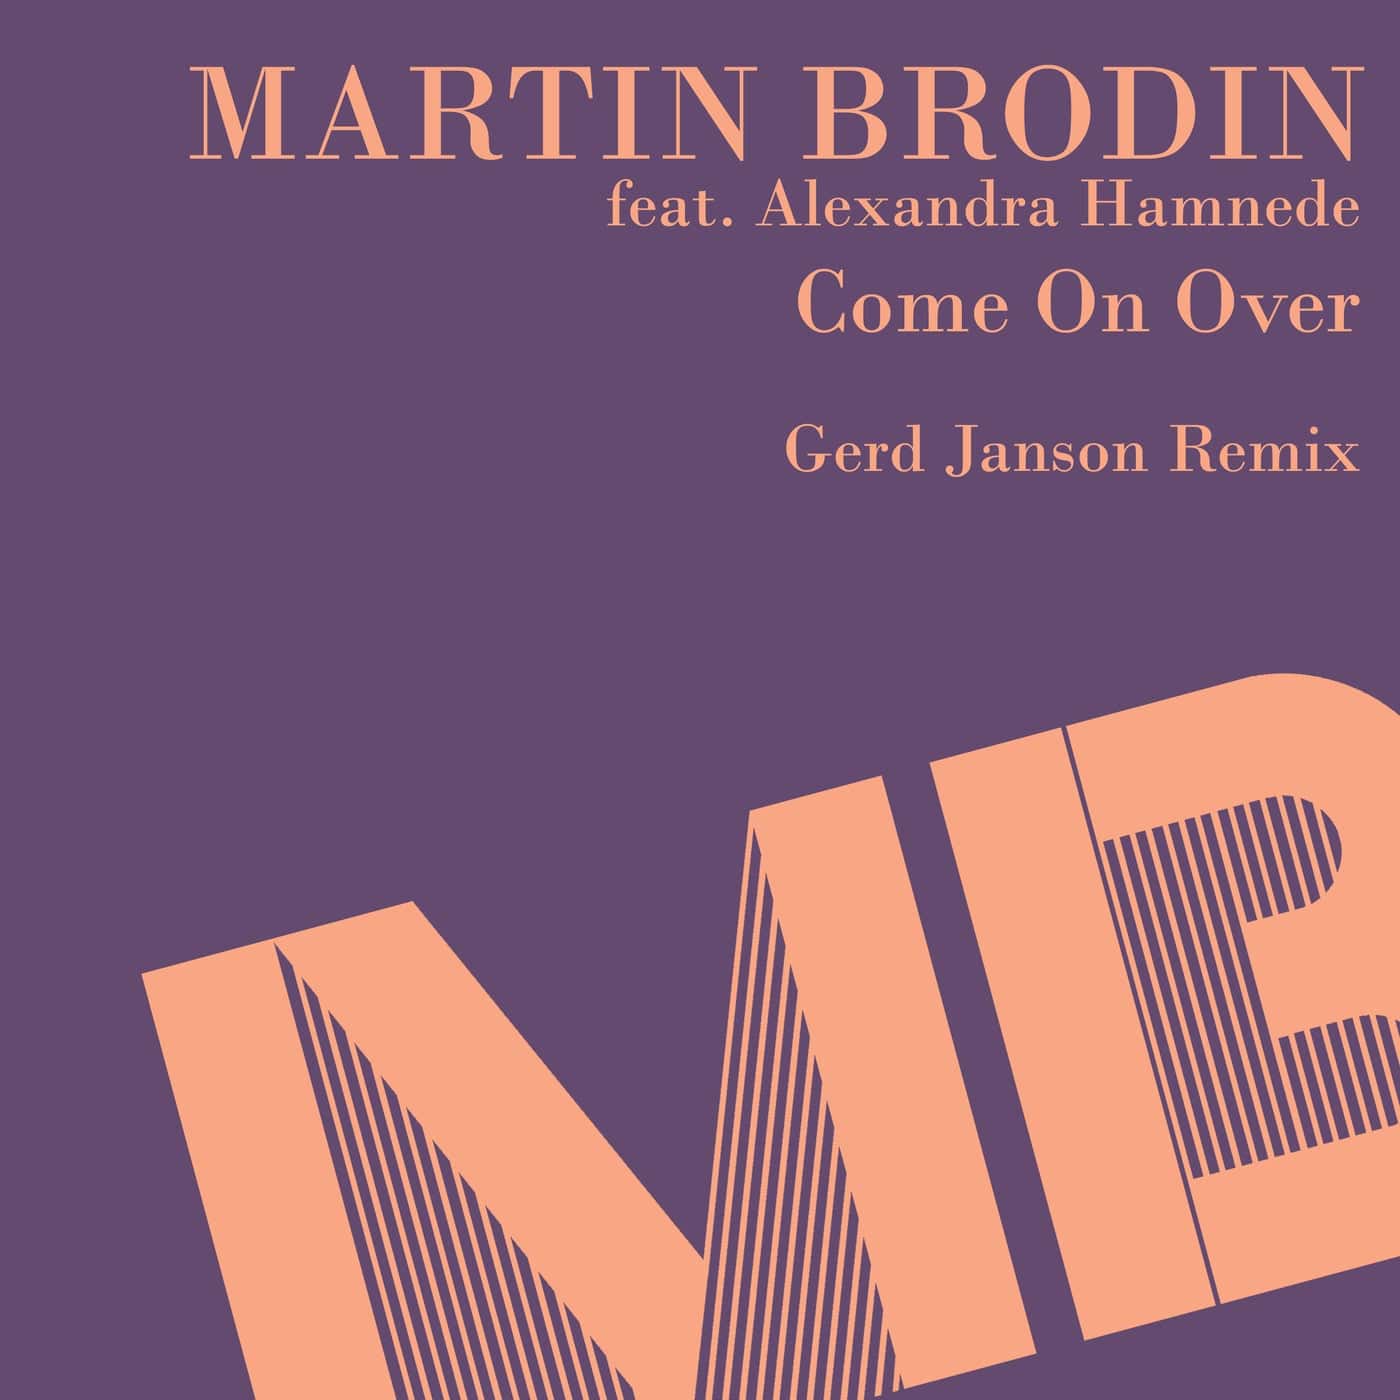 Download Martin Brodin, Alexandra Hamnede - Come on Over (Gerd Janson Remix) on Electrobuzz